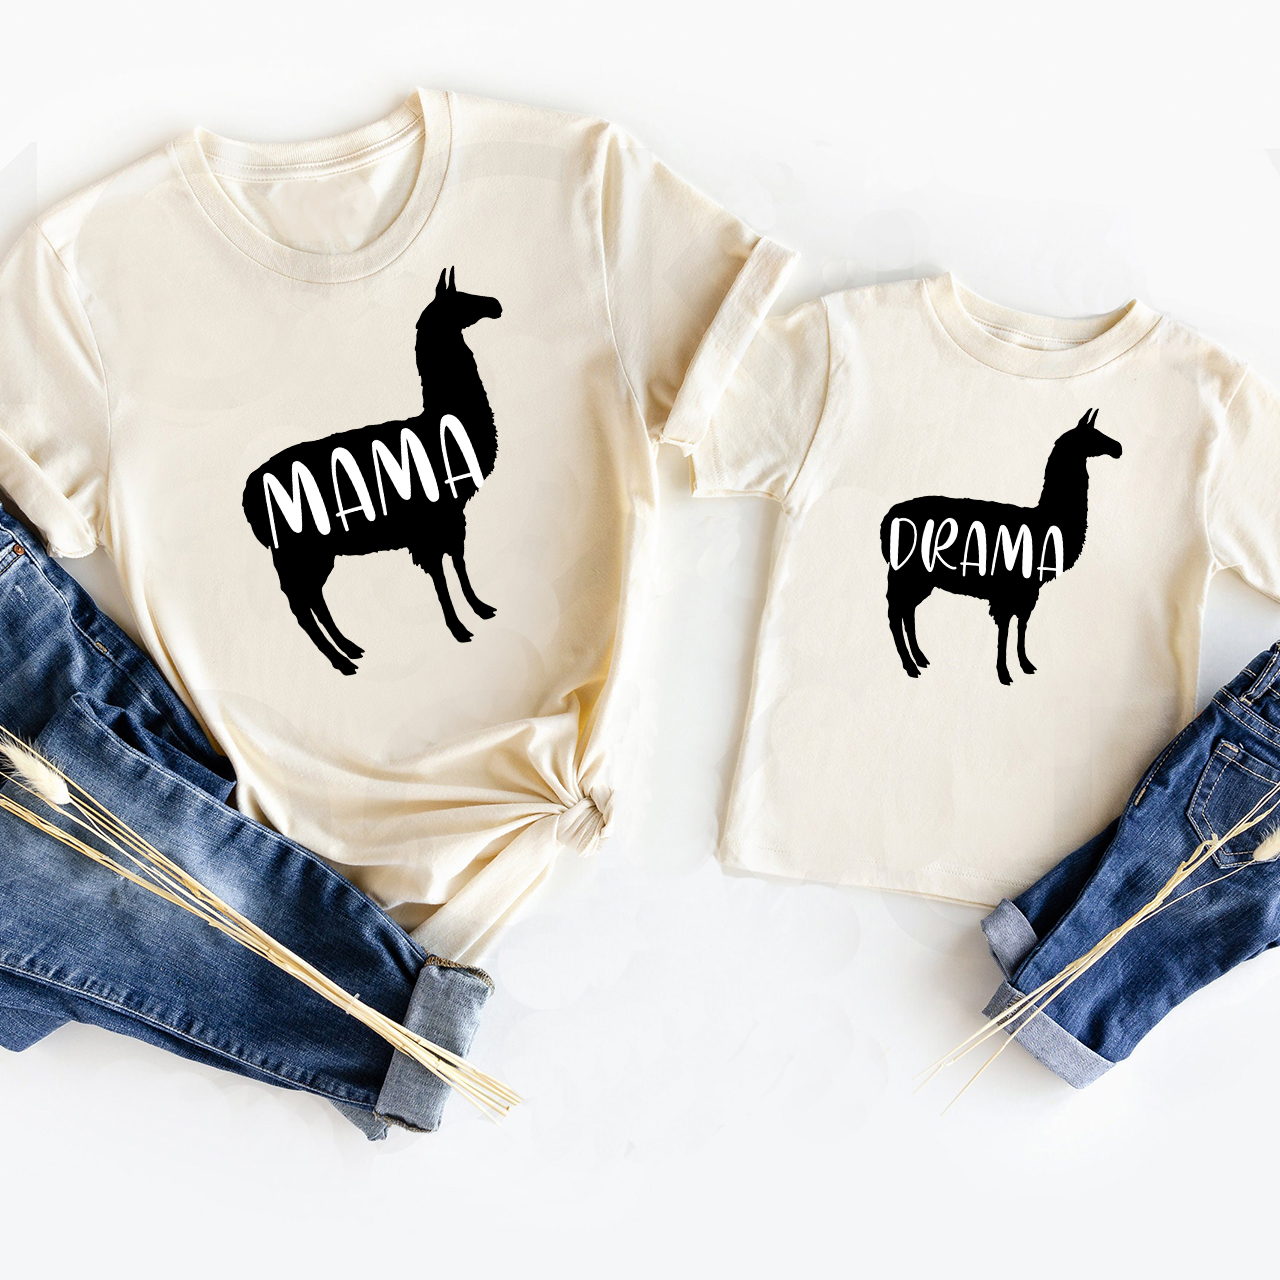 DRAMA & MAMA Matching Tees For Mother's Day